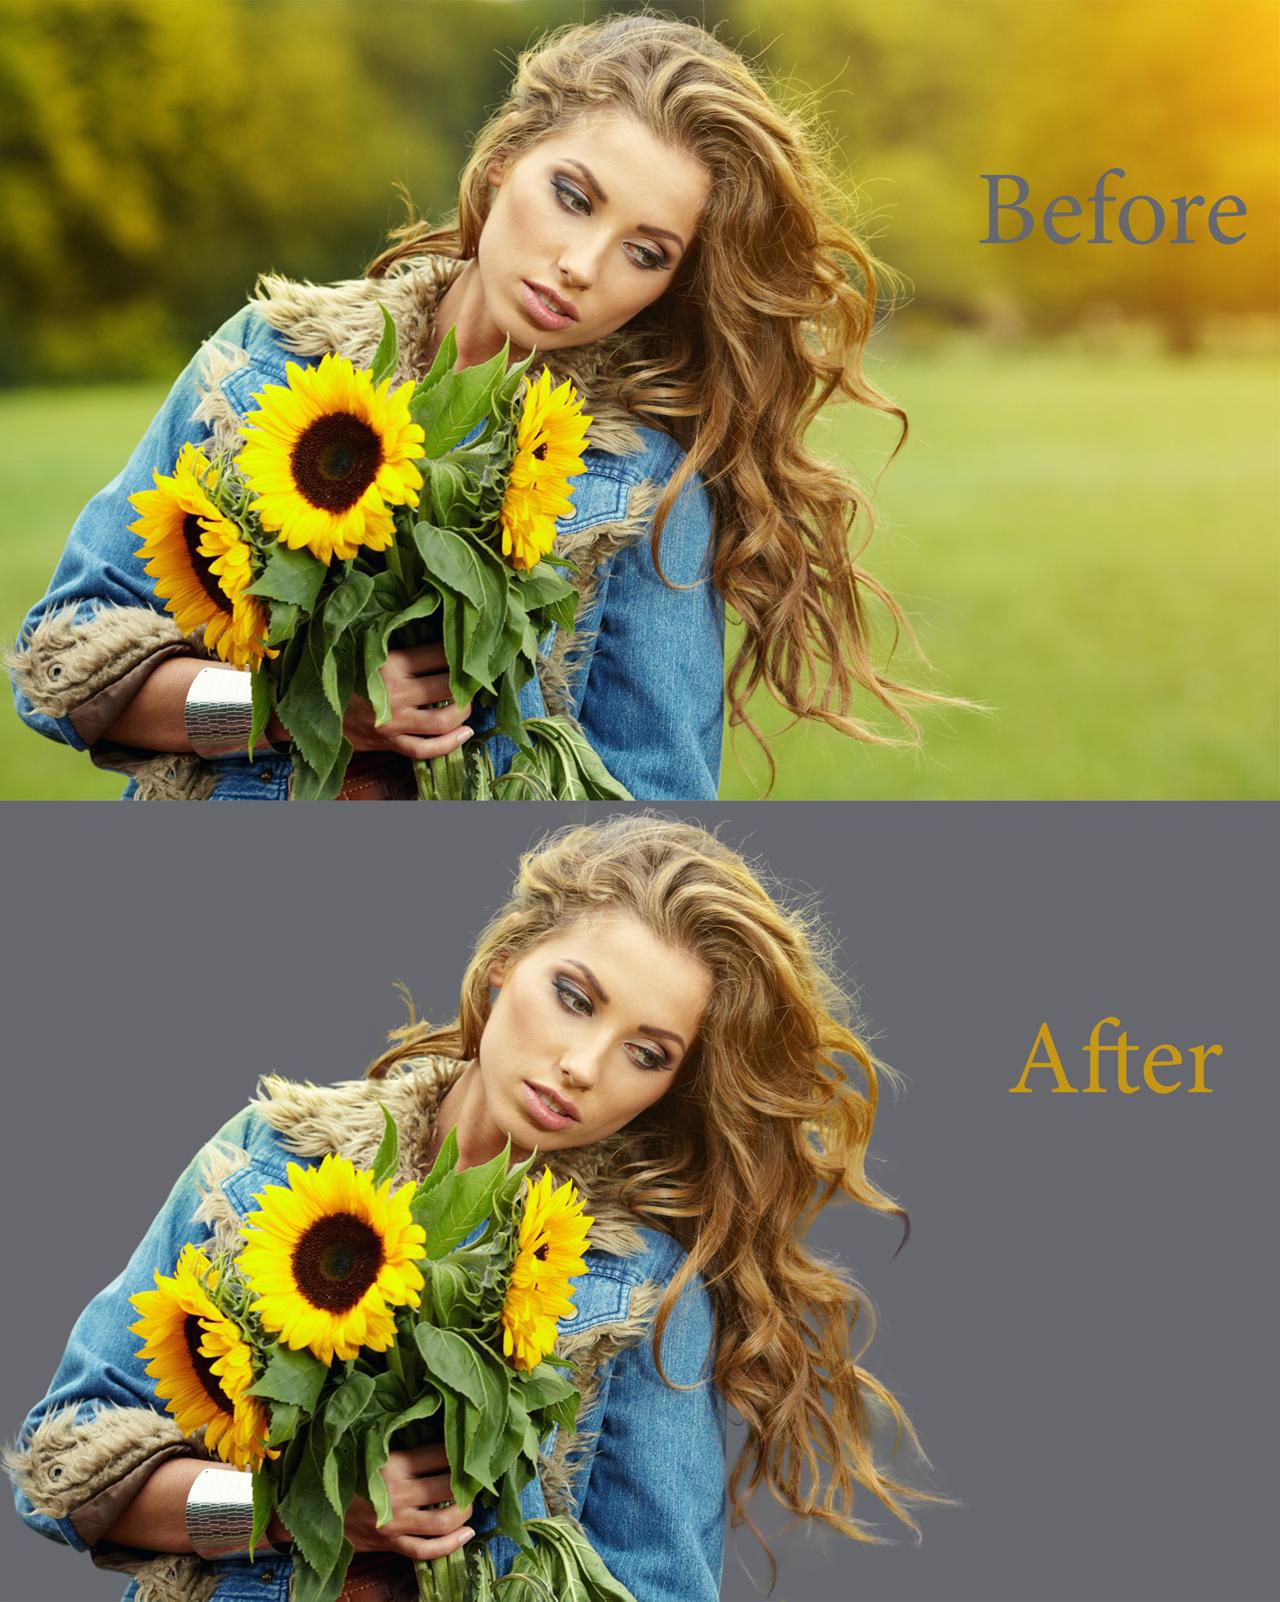 CLIPPING PATH